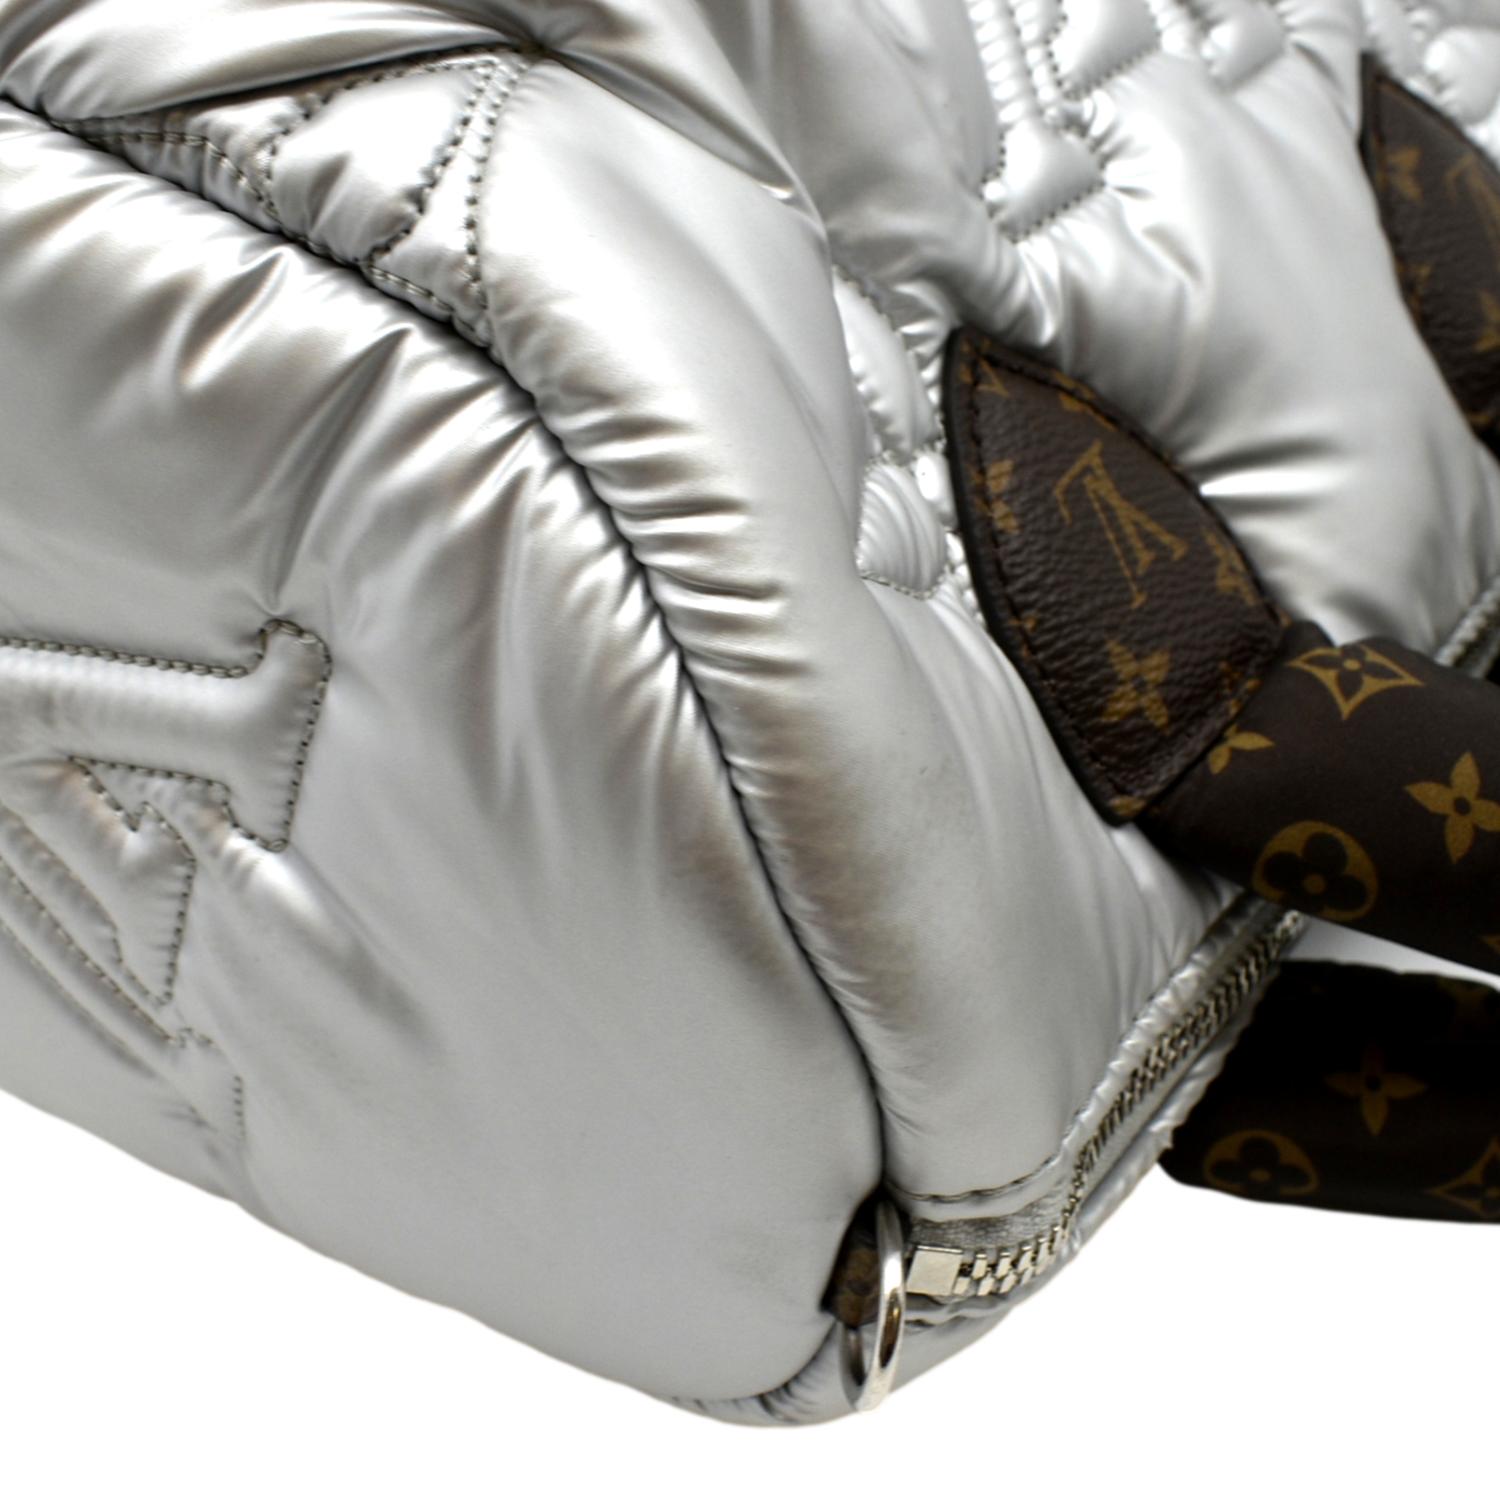 Louis Vuitton Pillow Backpack Monogram Quilted Econyl Nylon